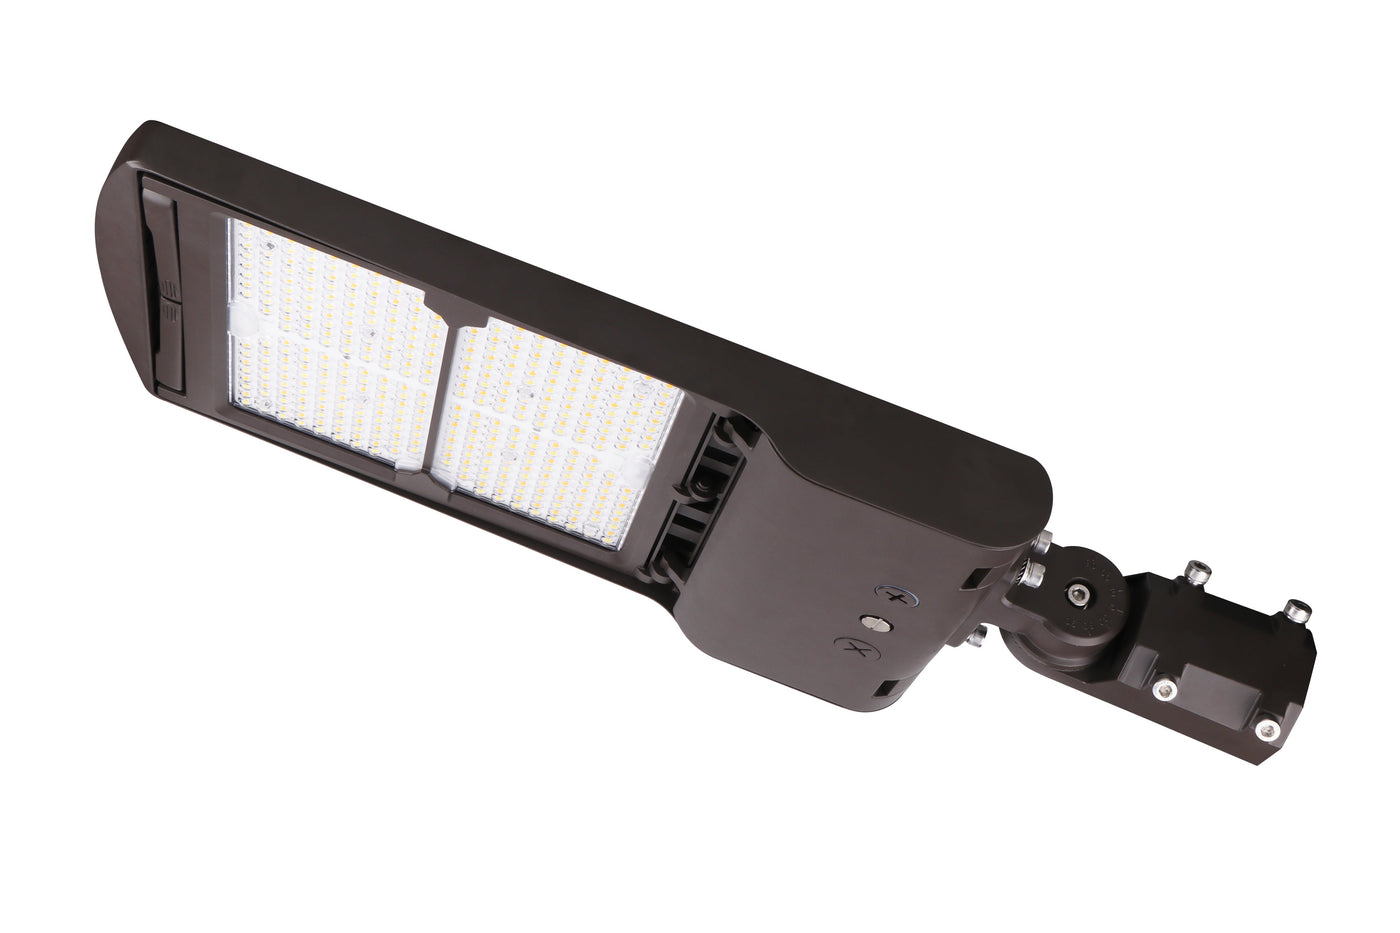 LED Area/Parking Lot Light, 45000 Lumen Max, Wattage and CCT Selectable, 120-277V